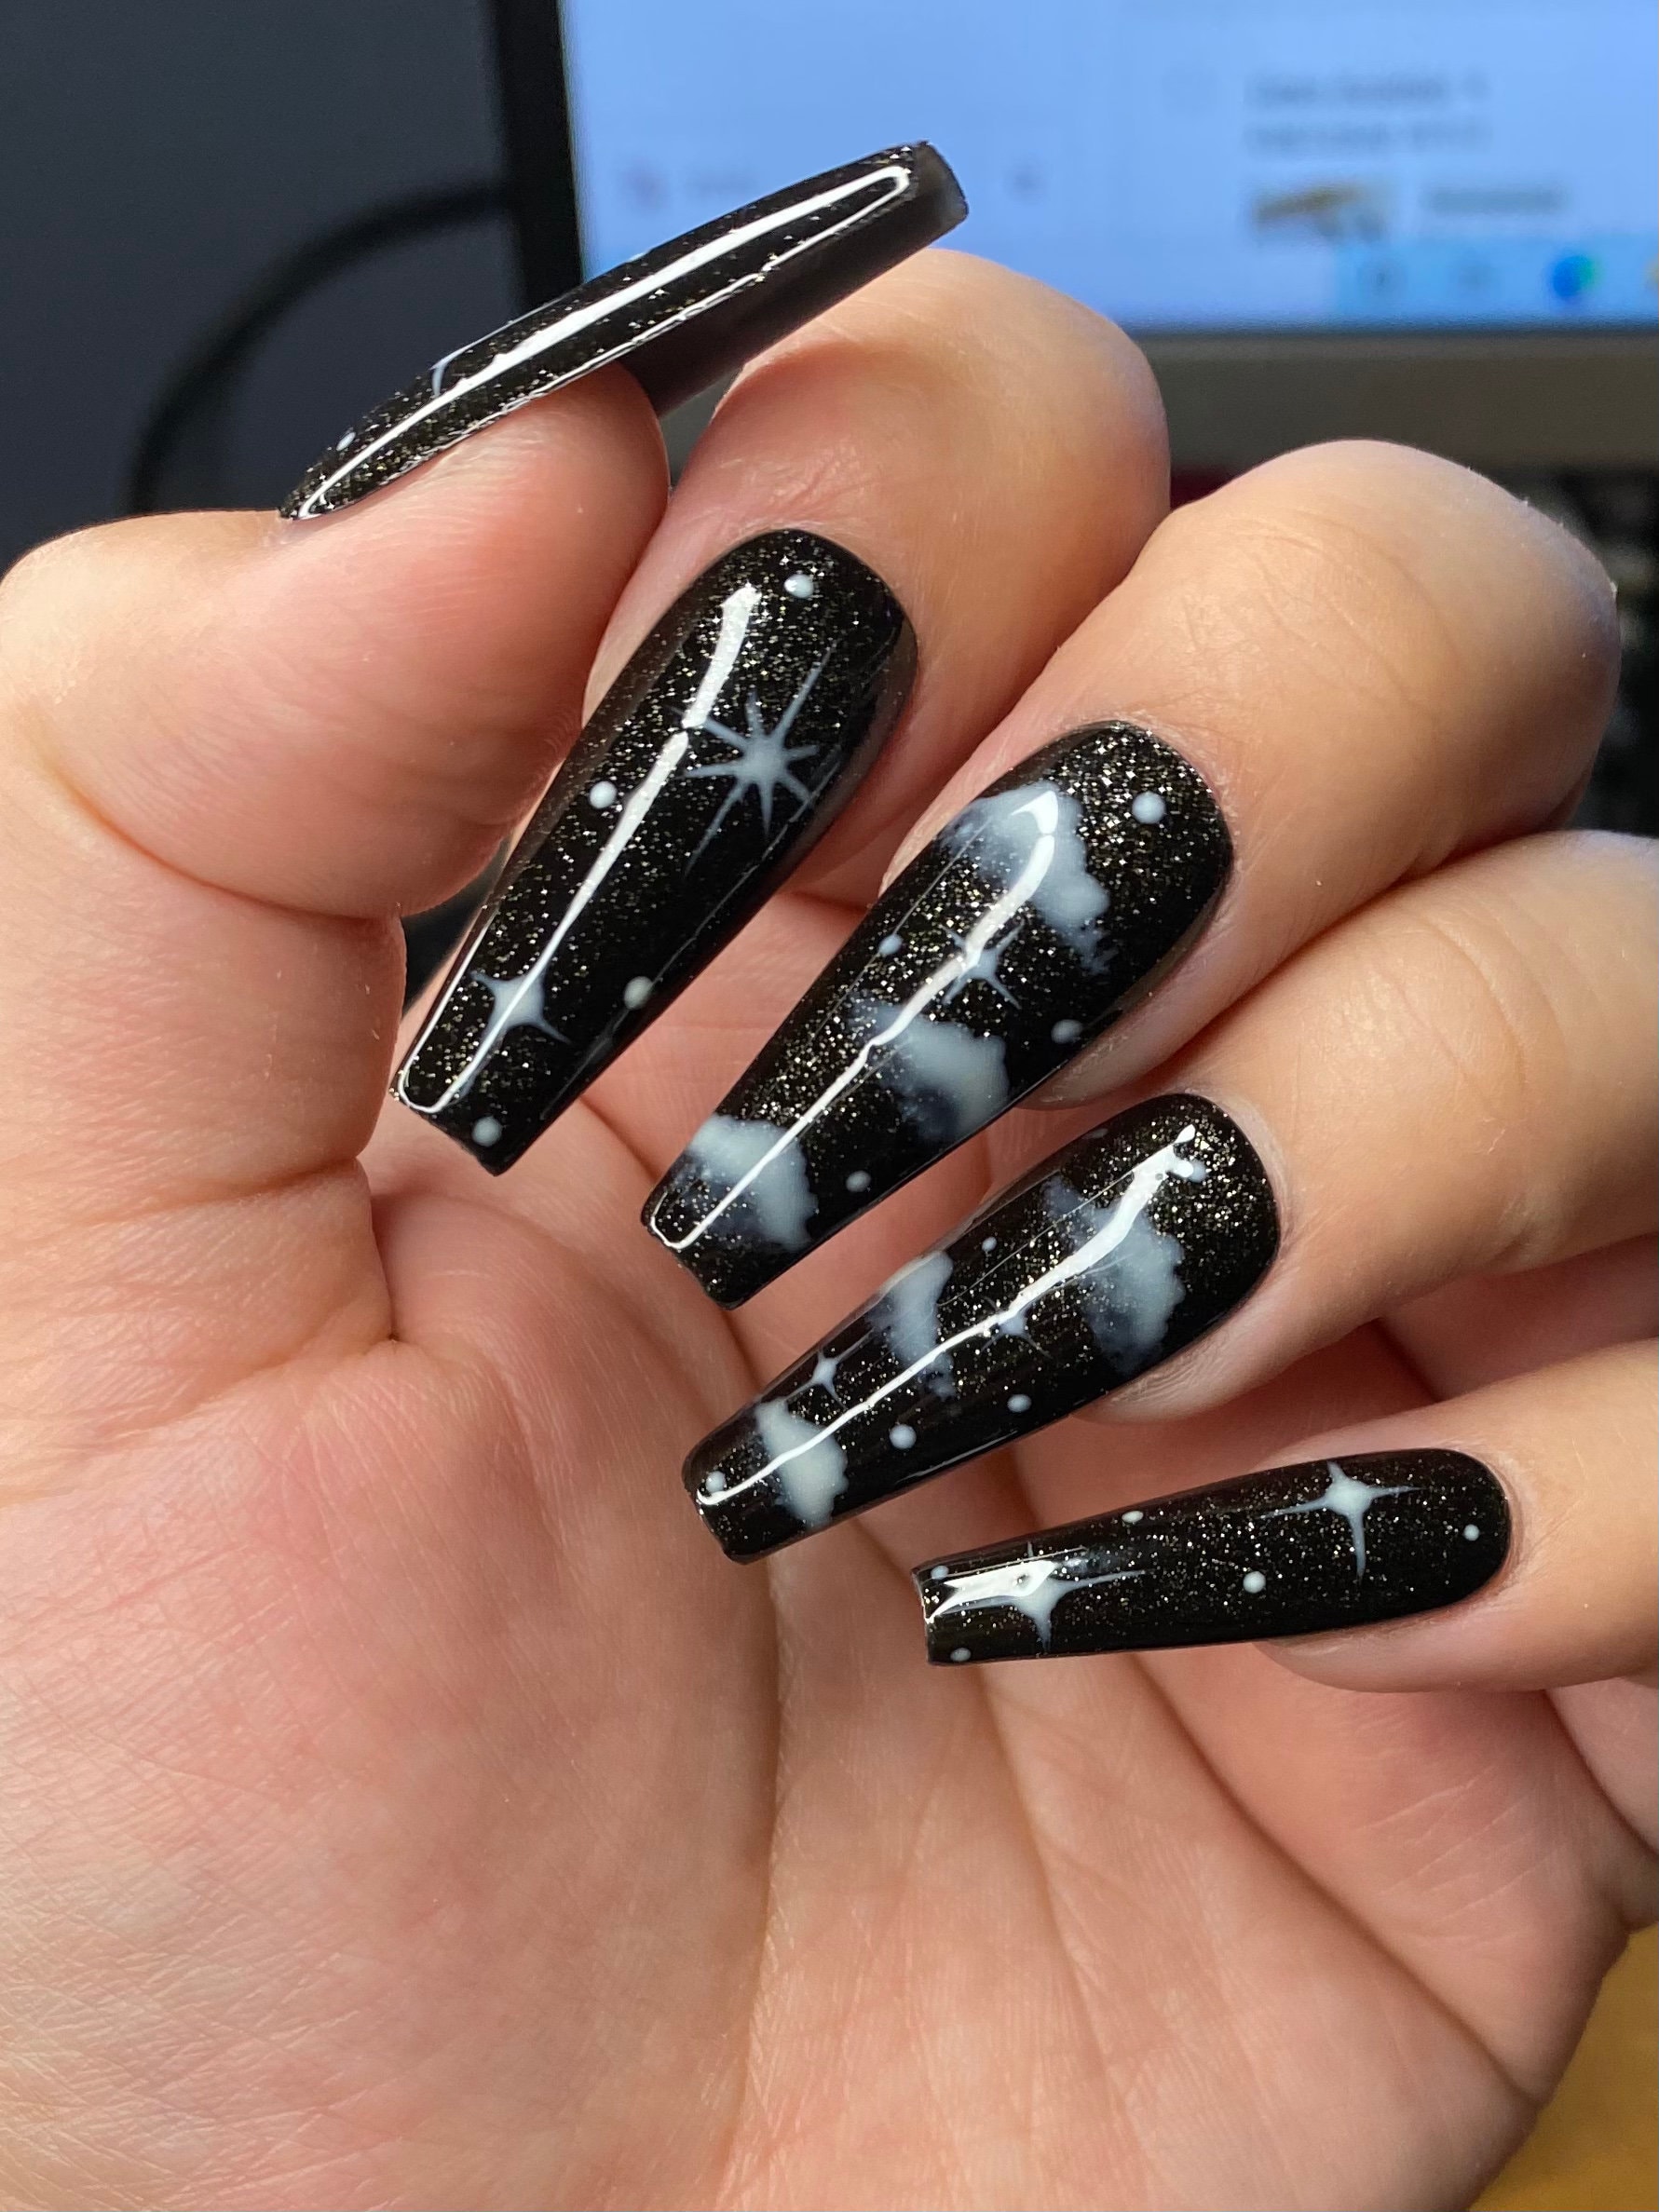 CakesInc.Nails - V L Black Negative Space 'NAIL DECALS, ♡ NAIL DECALS ♡